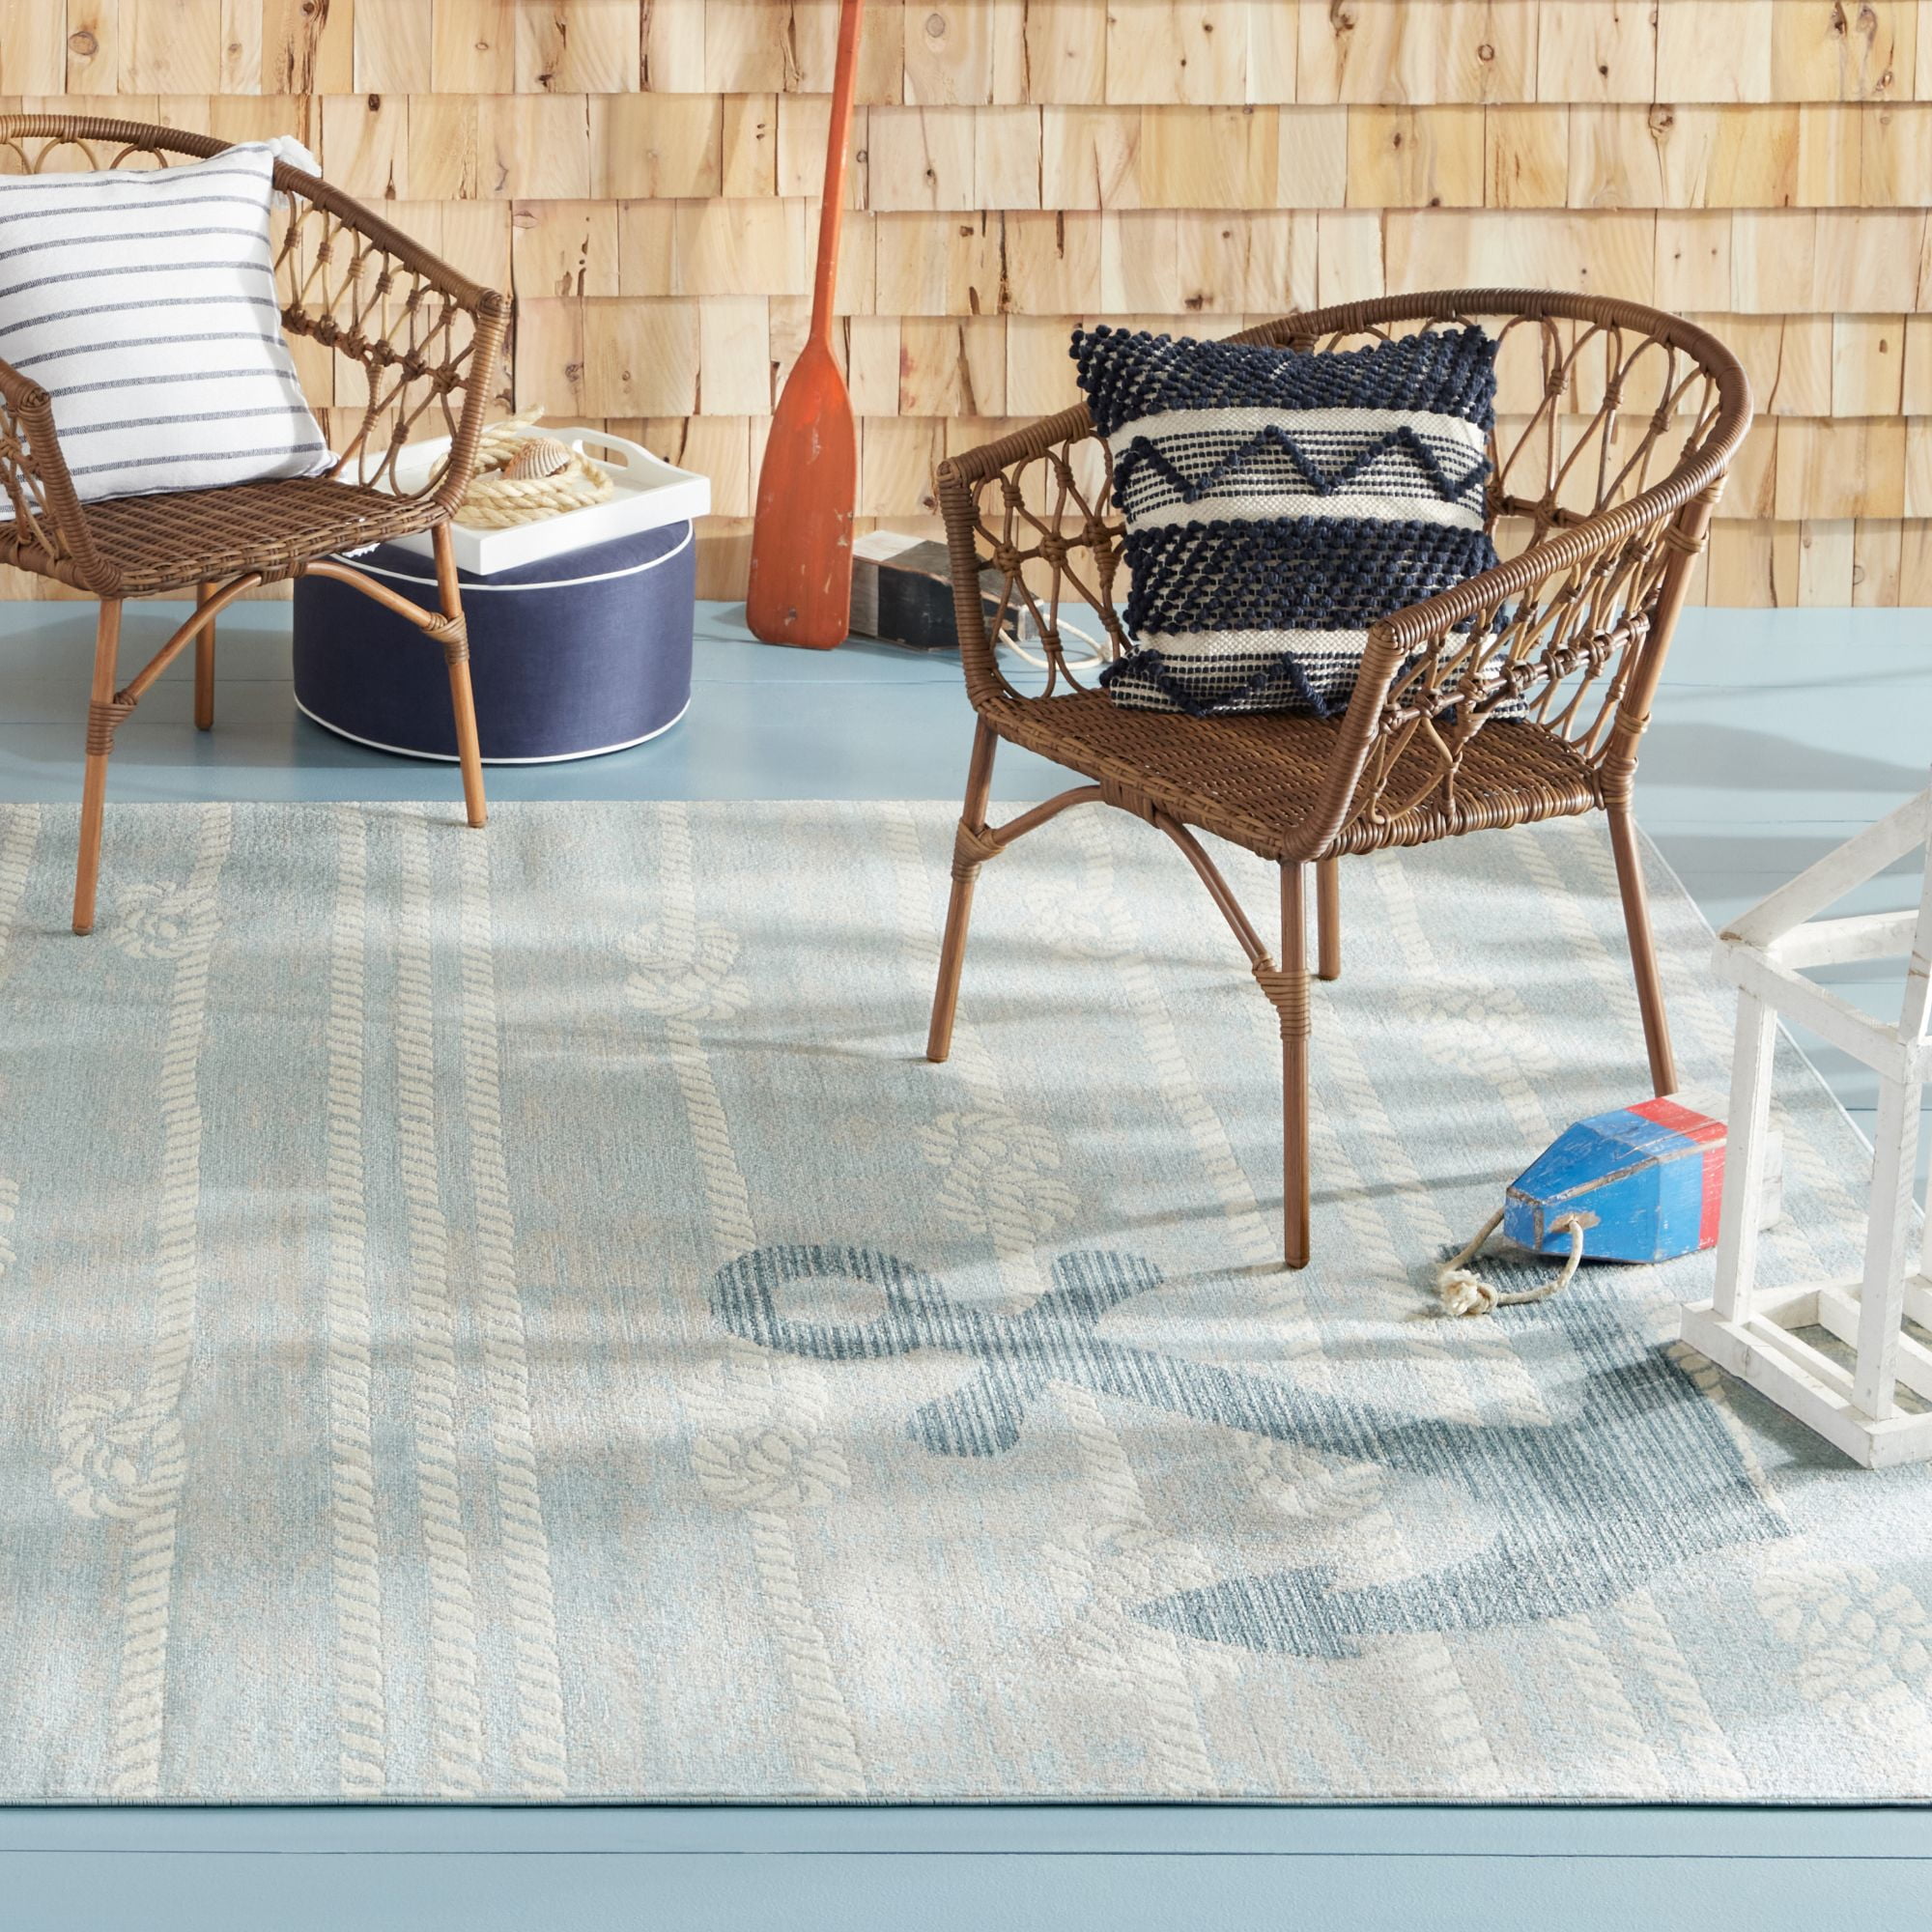 PRIVATE BRAND UNBRANDED Bazaar Coastal Beige/Blue 5 ft. x 7 ft. Anchors  Area Rug 2-7071-102 - The Home Depot